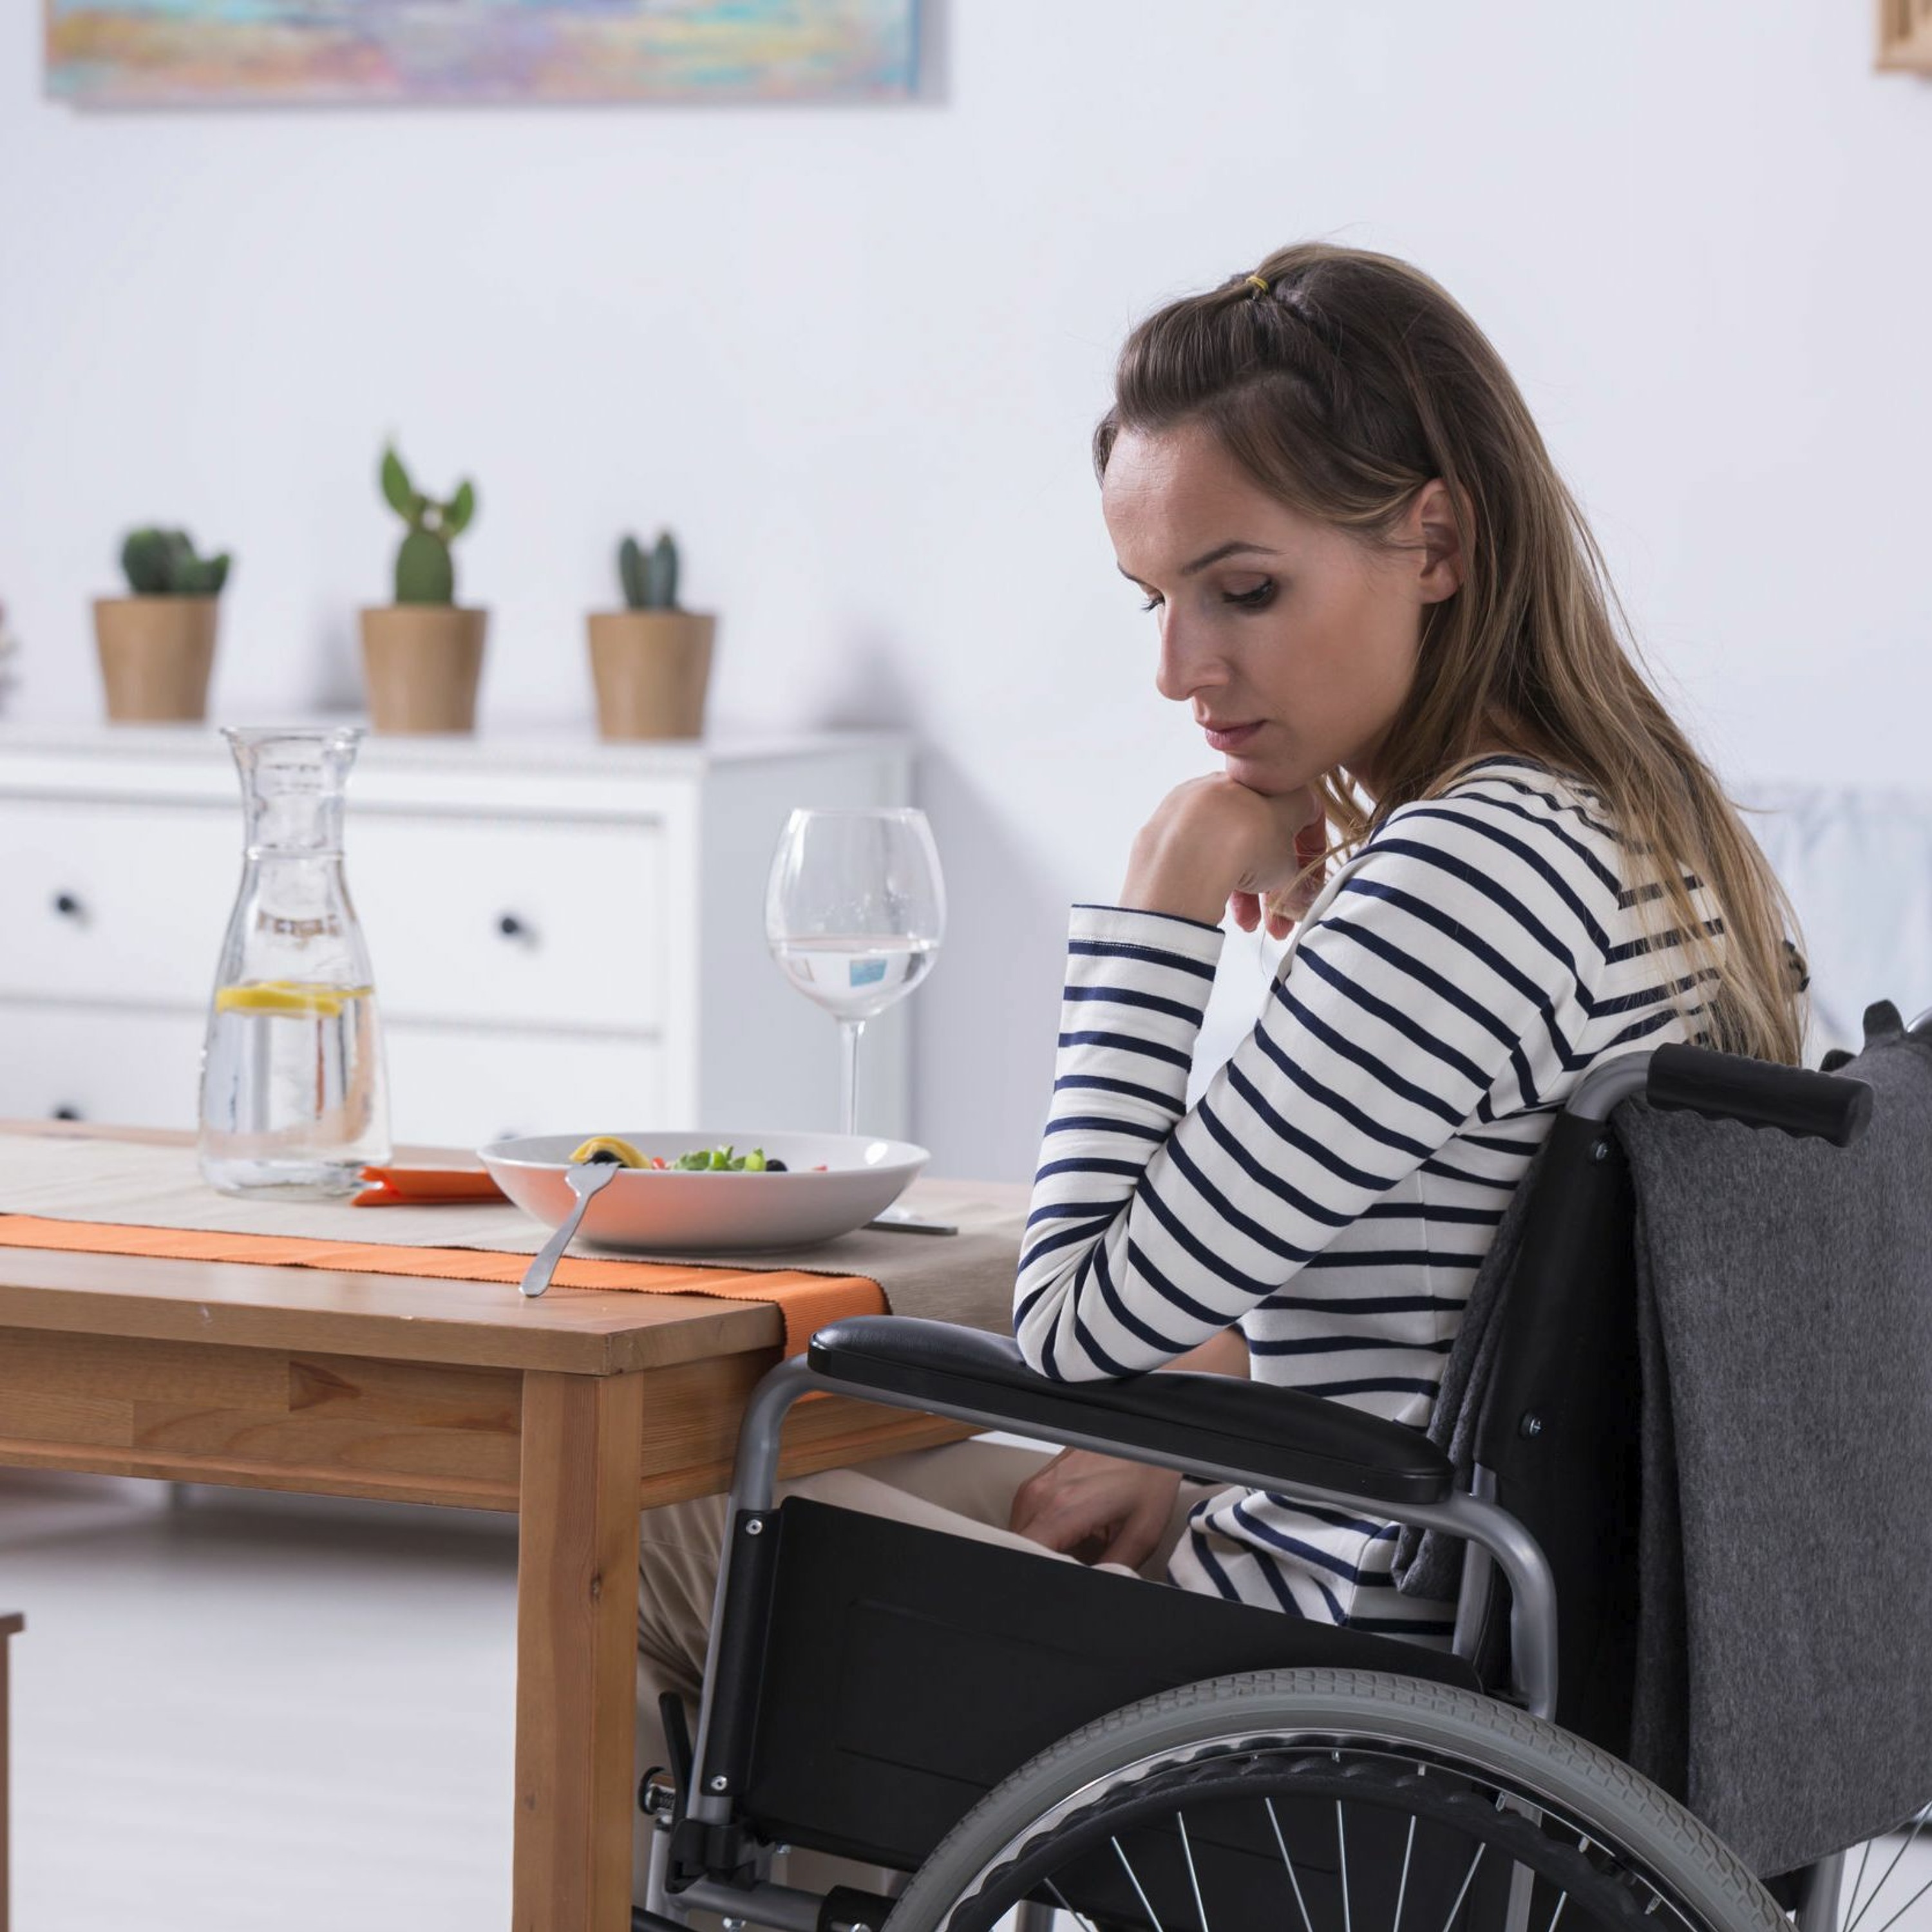 Disability and domestic violence